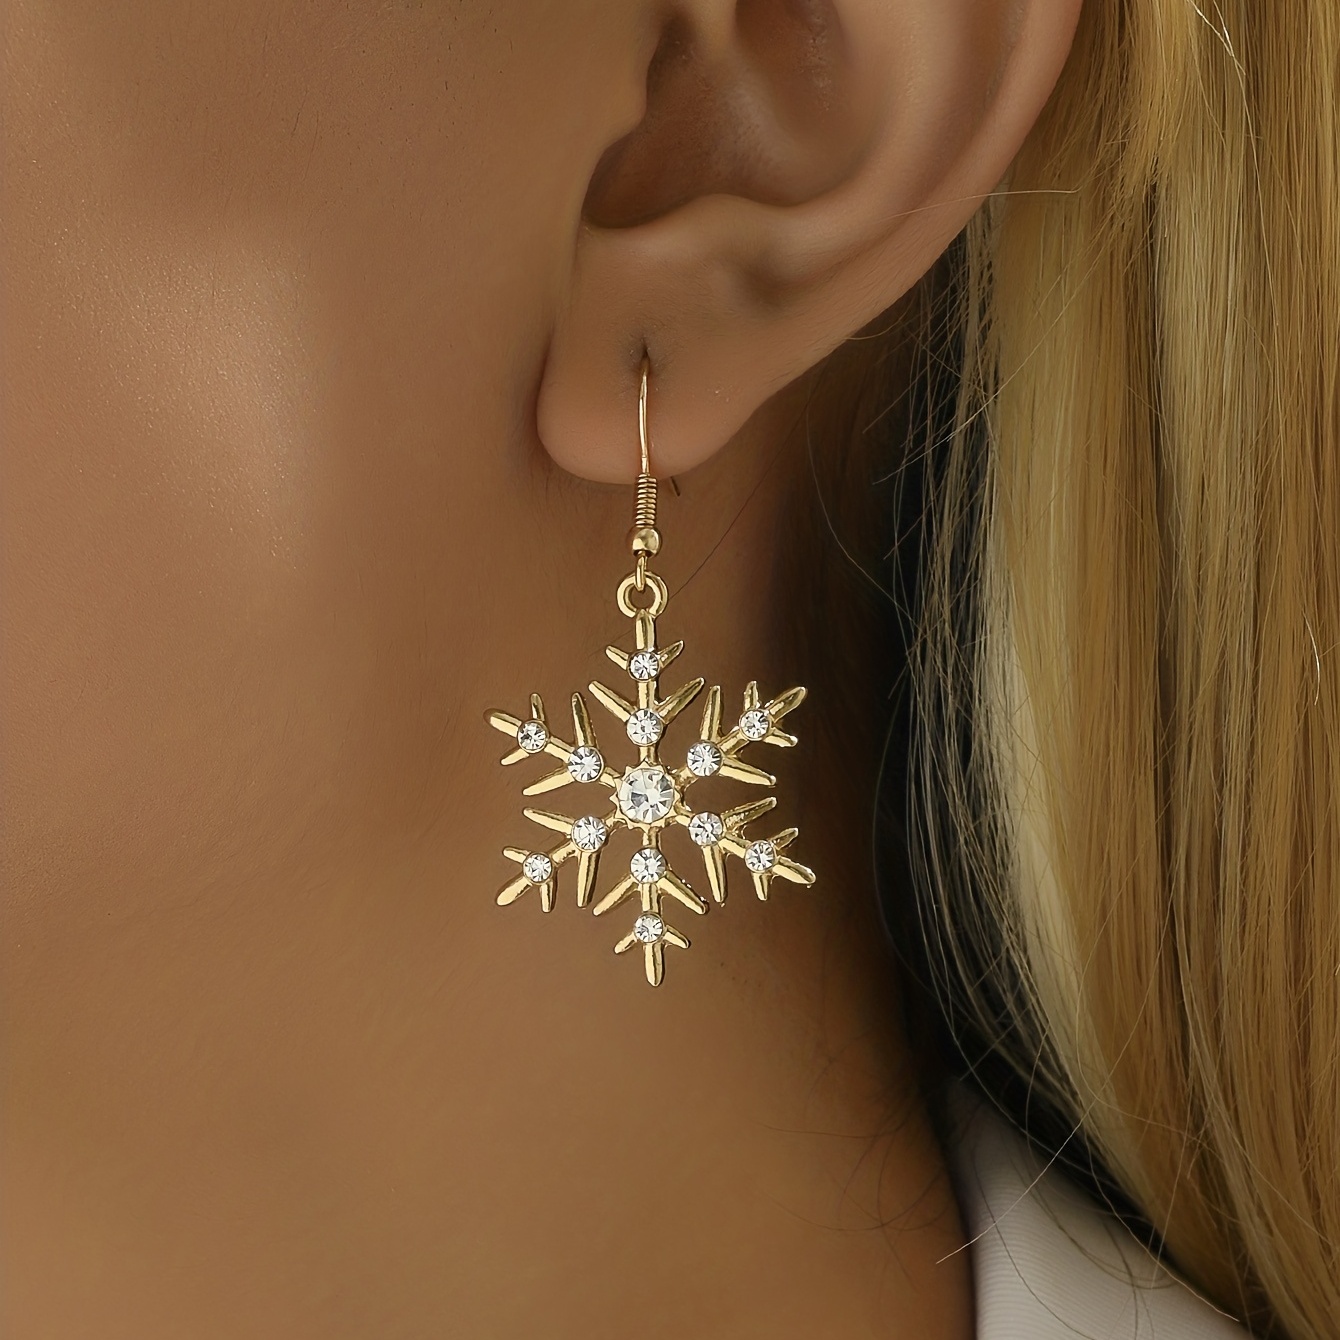 Snowflake Long Chain Design With Sparkling Zircon Inlaid Dangle Earrings  Elegant Style Copper Jewelry Party Ornaments